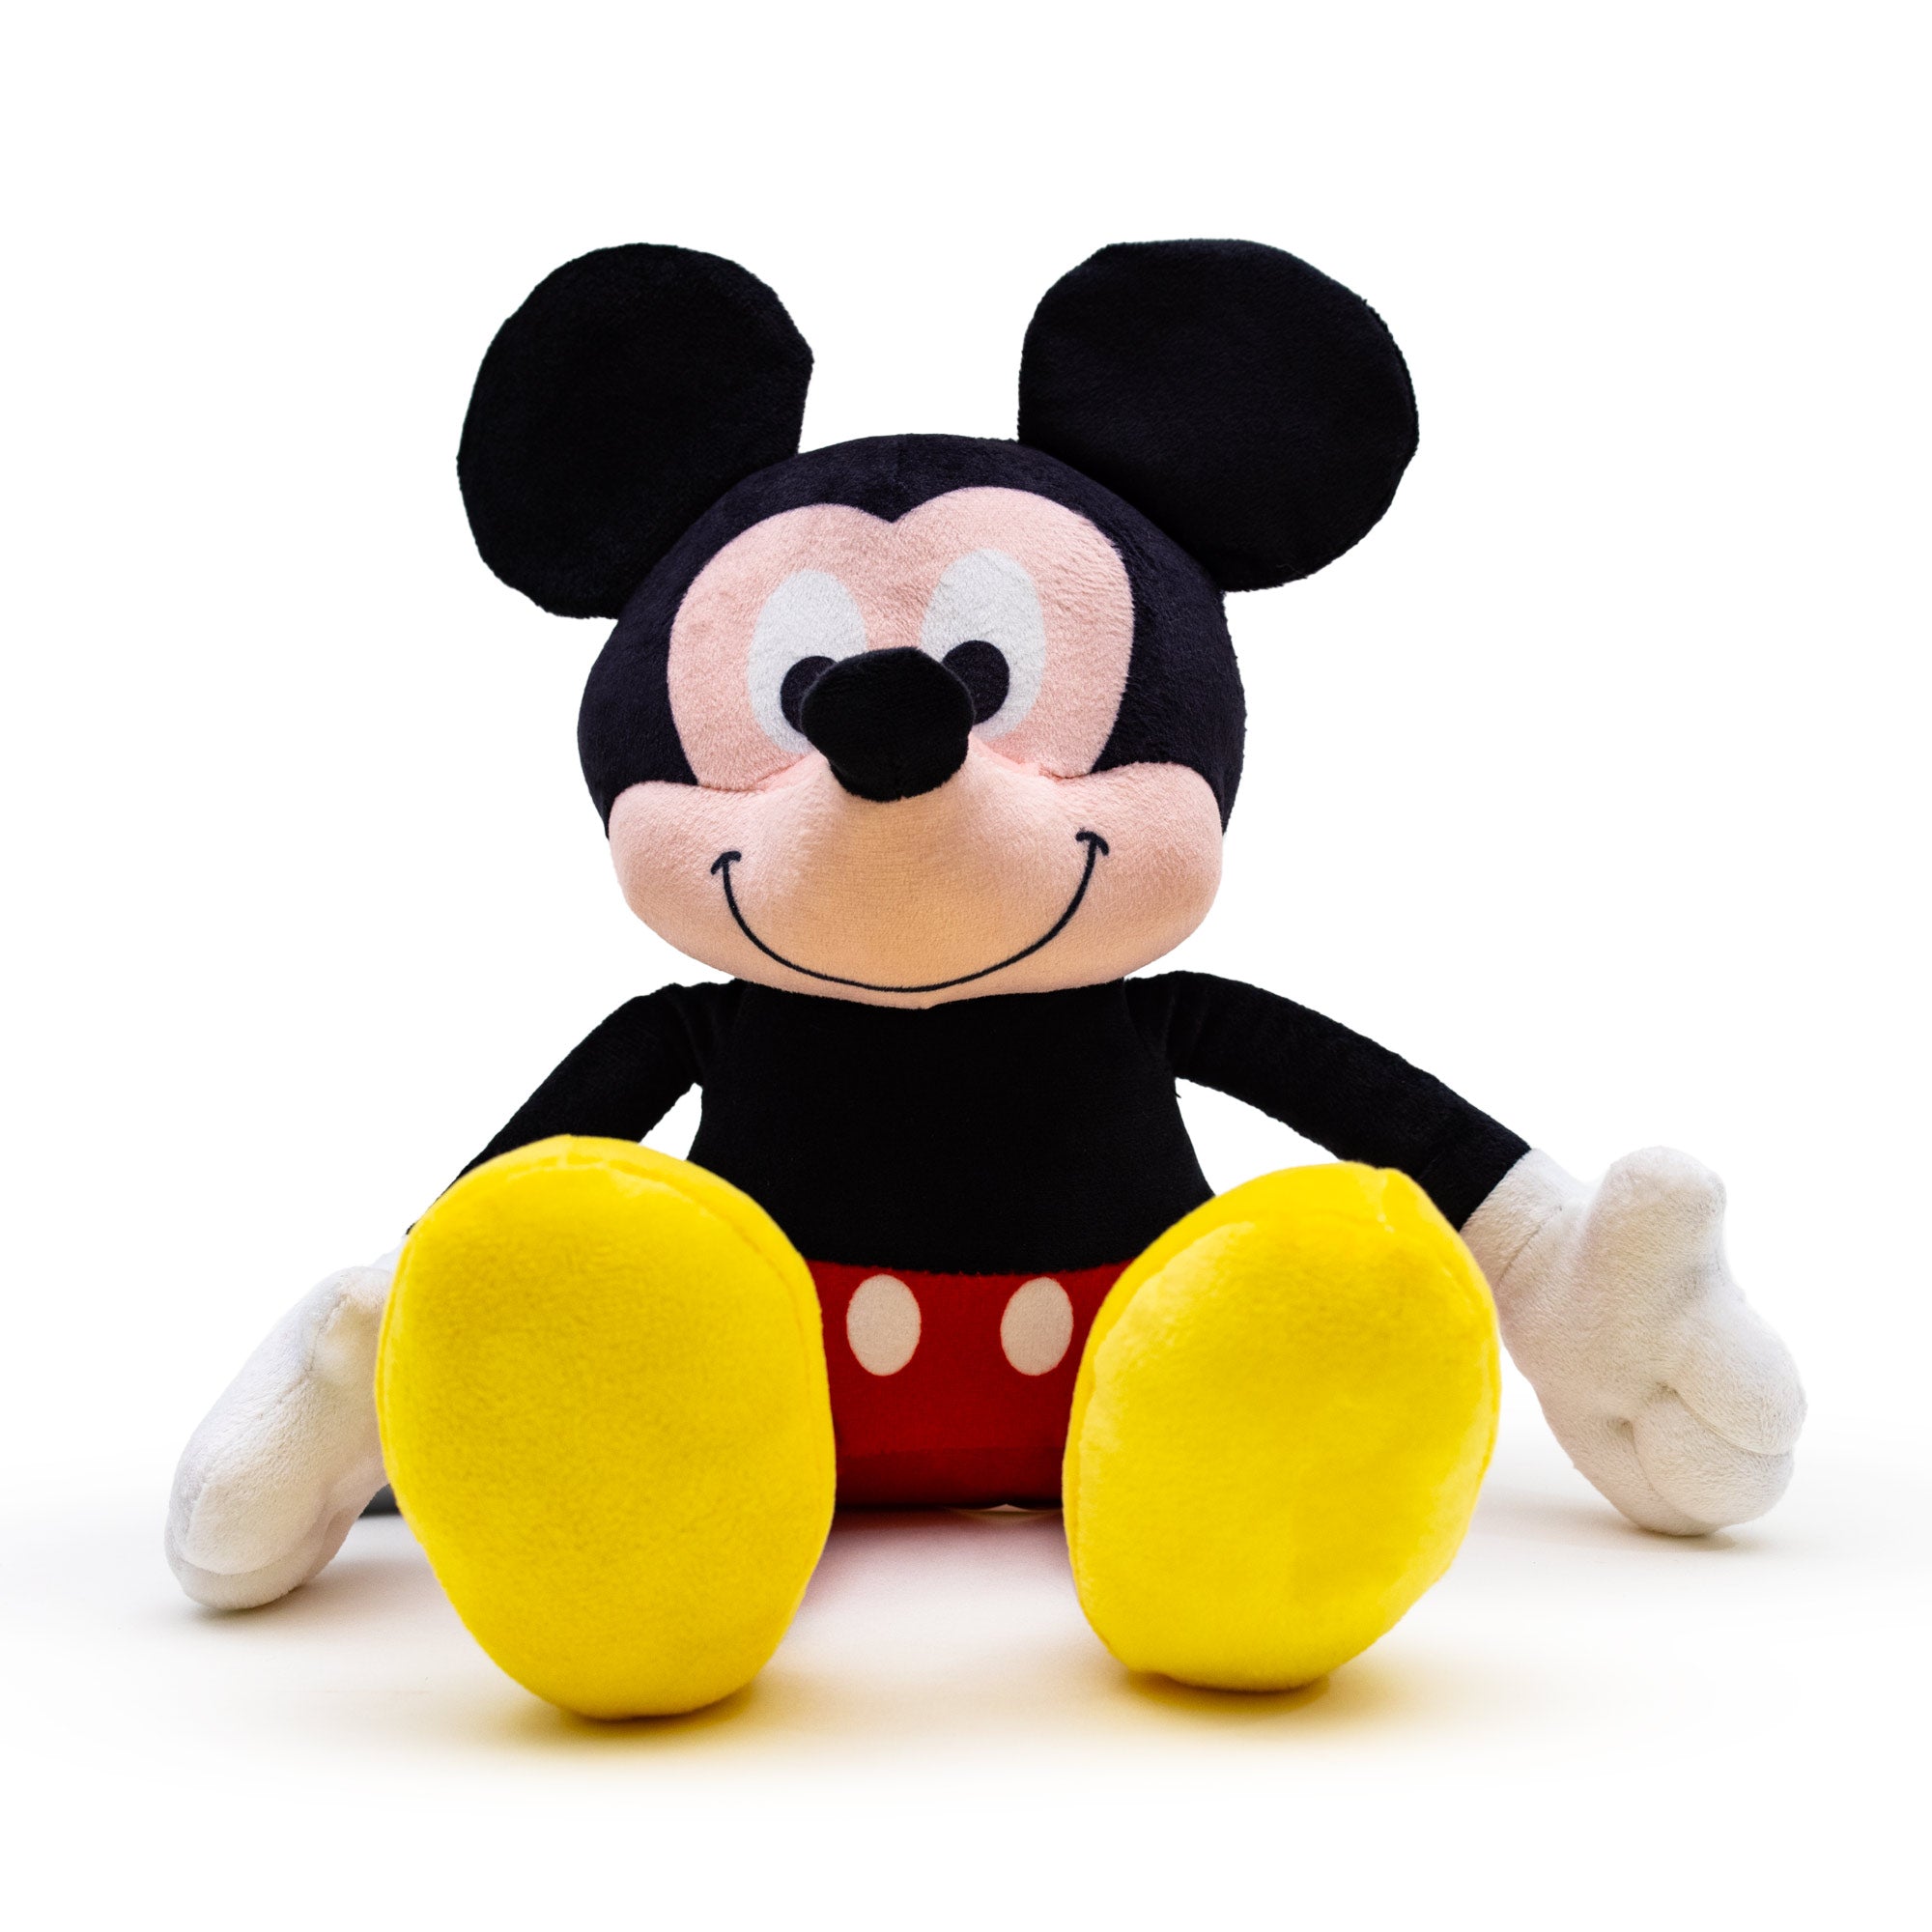 Mickey Mouse Disney Pose 4-Pack 15oz Color Changing Cups